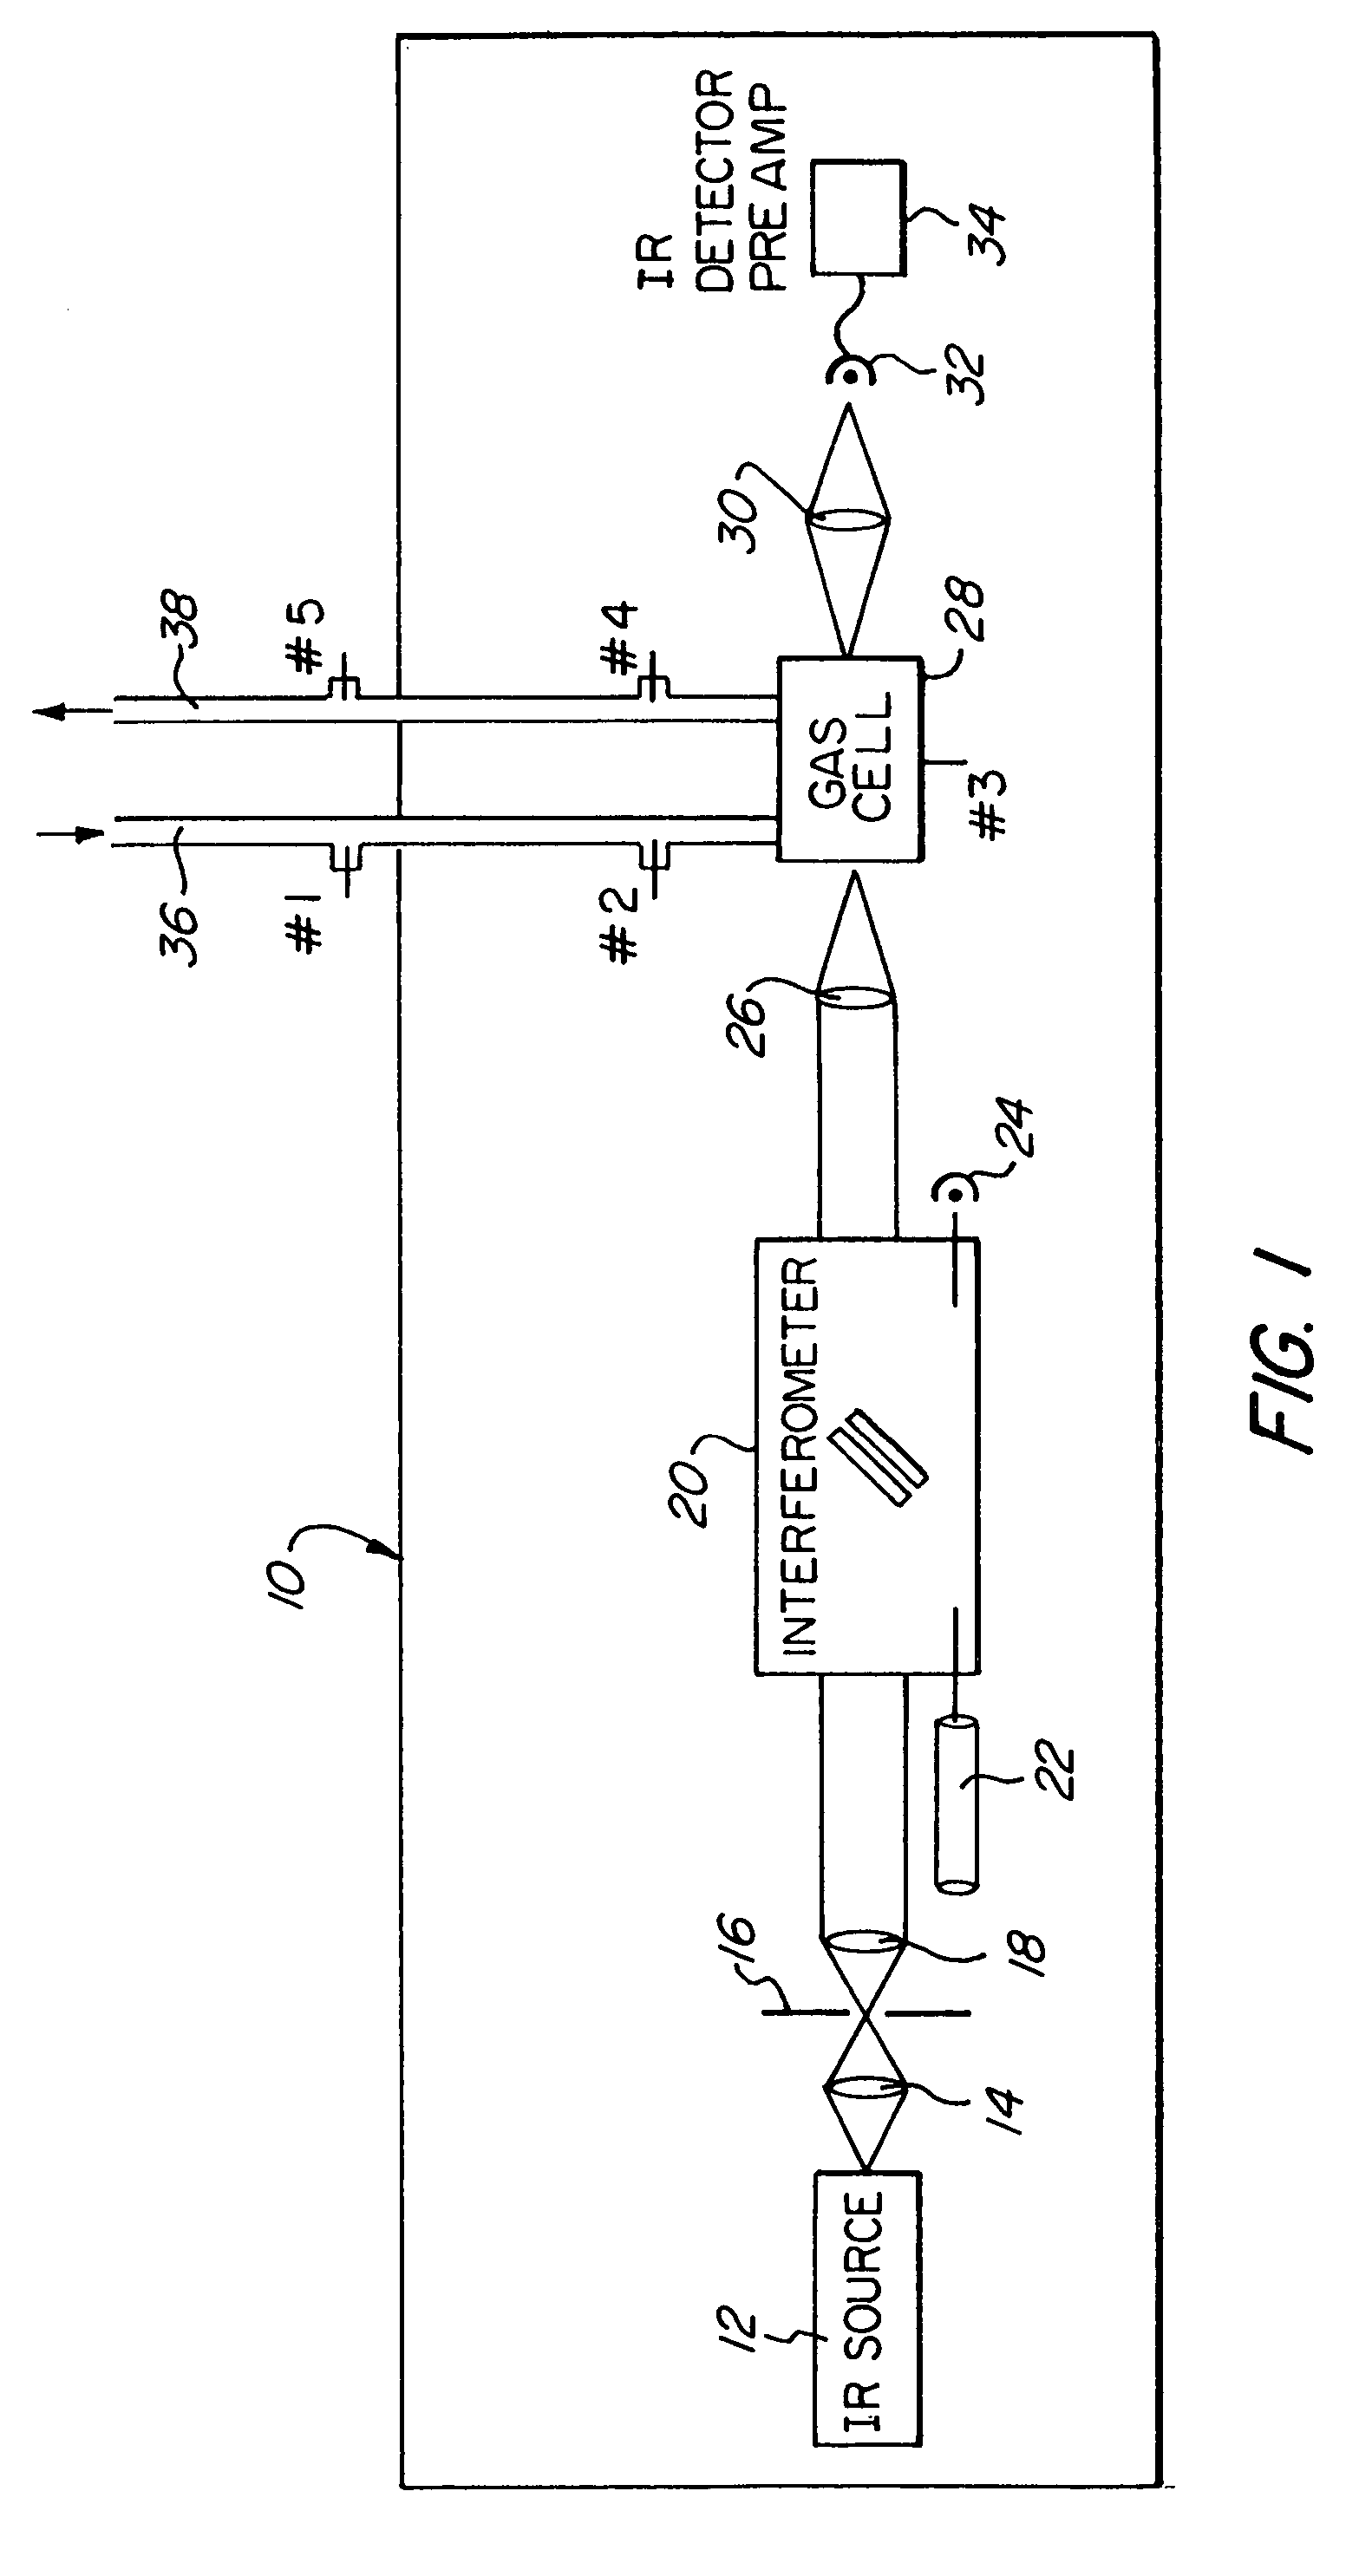 Analyzer for measuring multiple gases